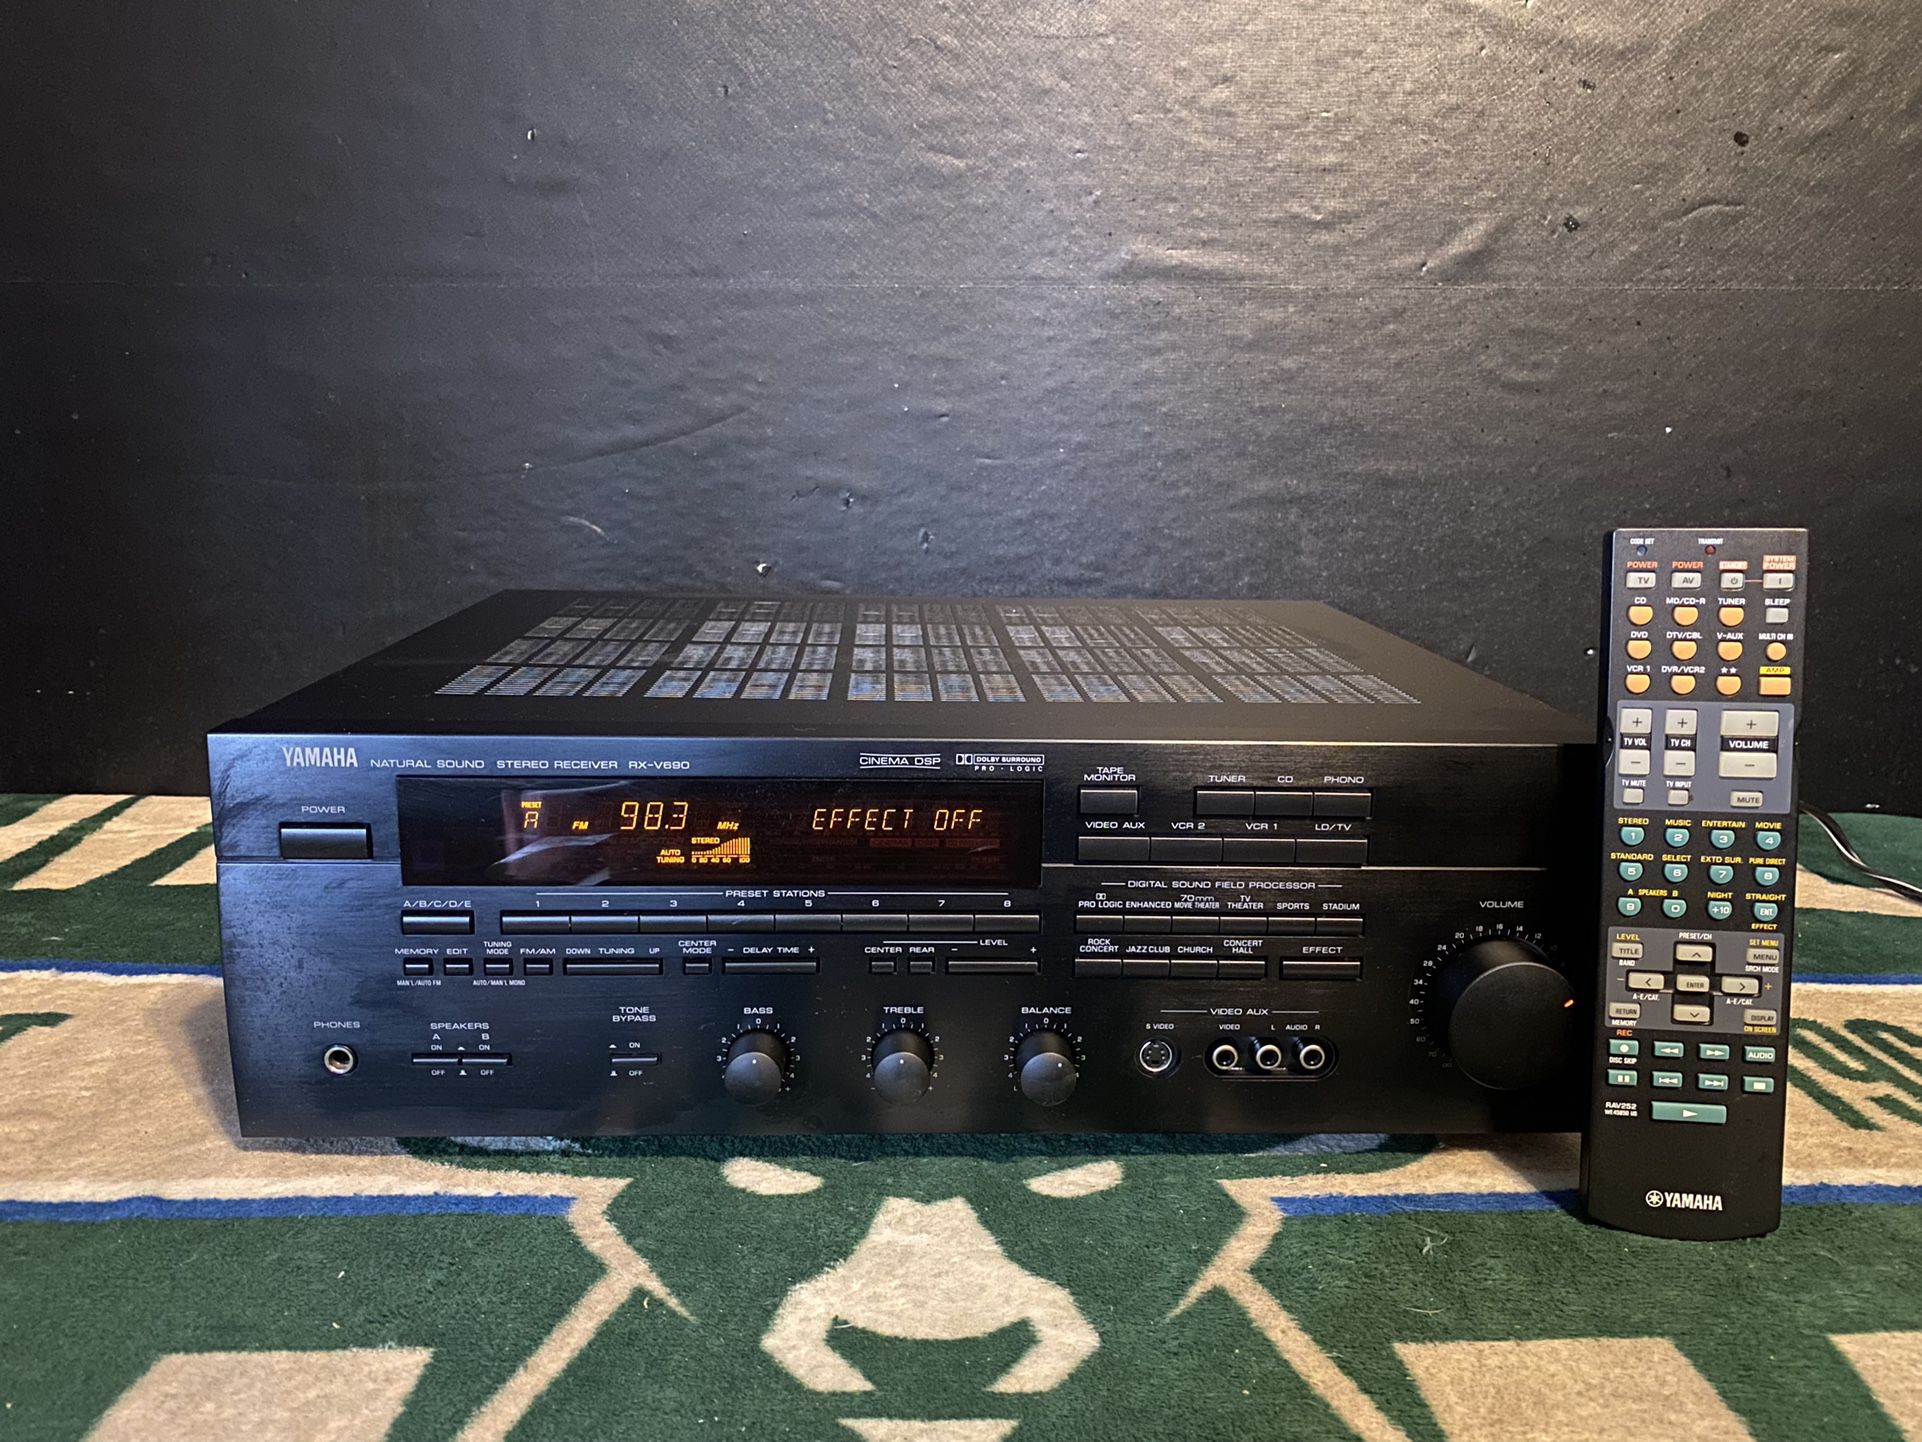 Yamaha RX-V690 5.1-Channel Natural Sound Stereo Receiver. 